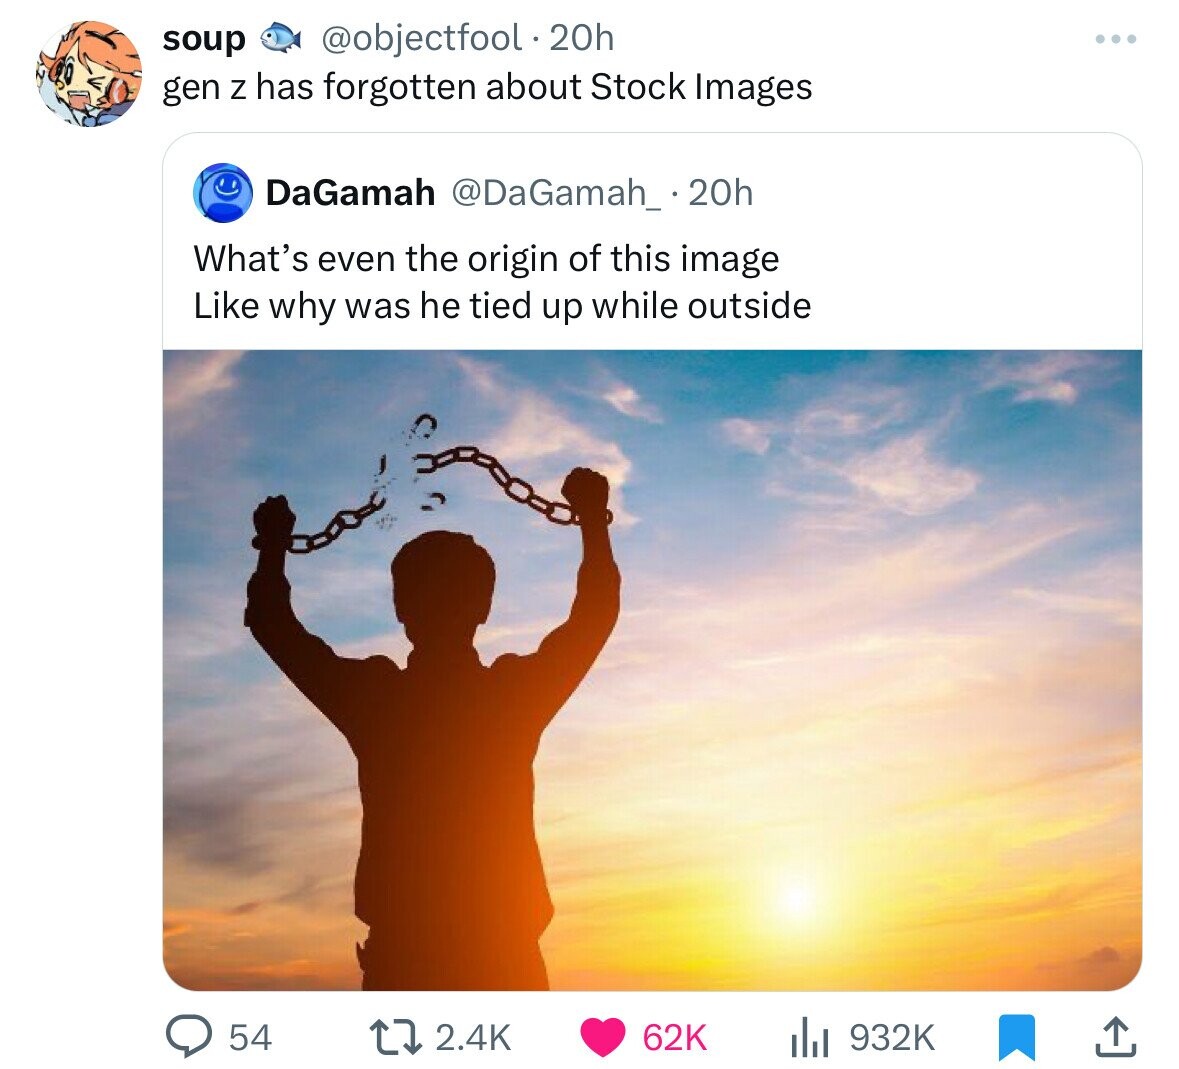 soup @objectfool.20h ... gen Z has forgotten about Stock Images DaGamah @DaGamah_ 20h What's even the origin of this image Like why was he tied up while outside 54 2.4K 62K 932K 